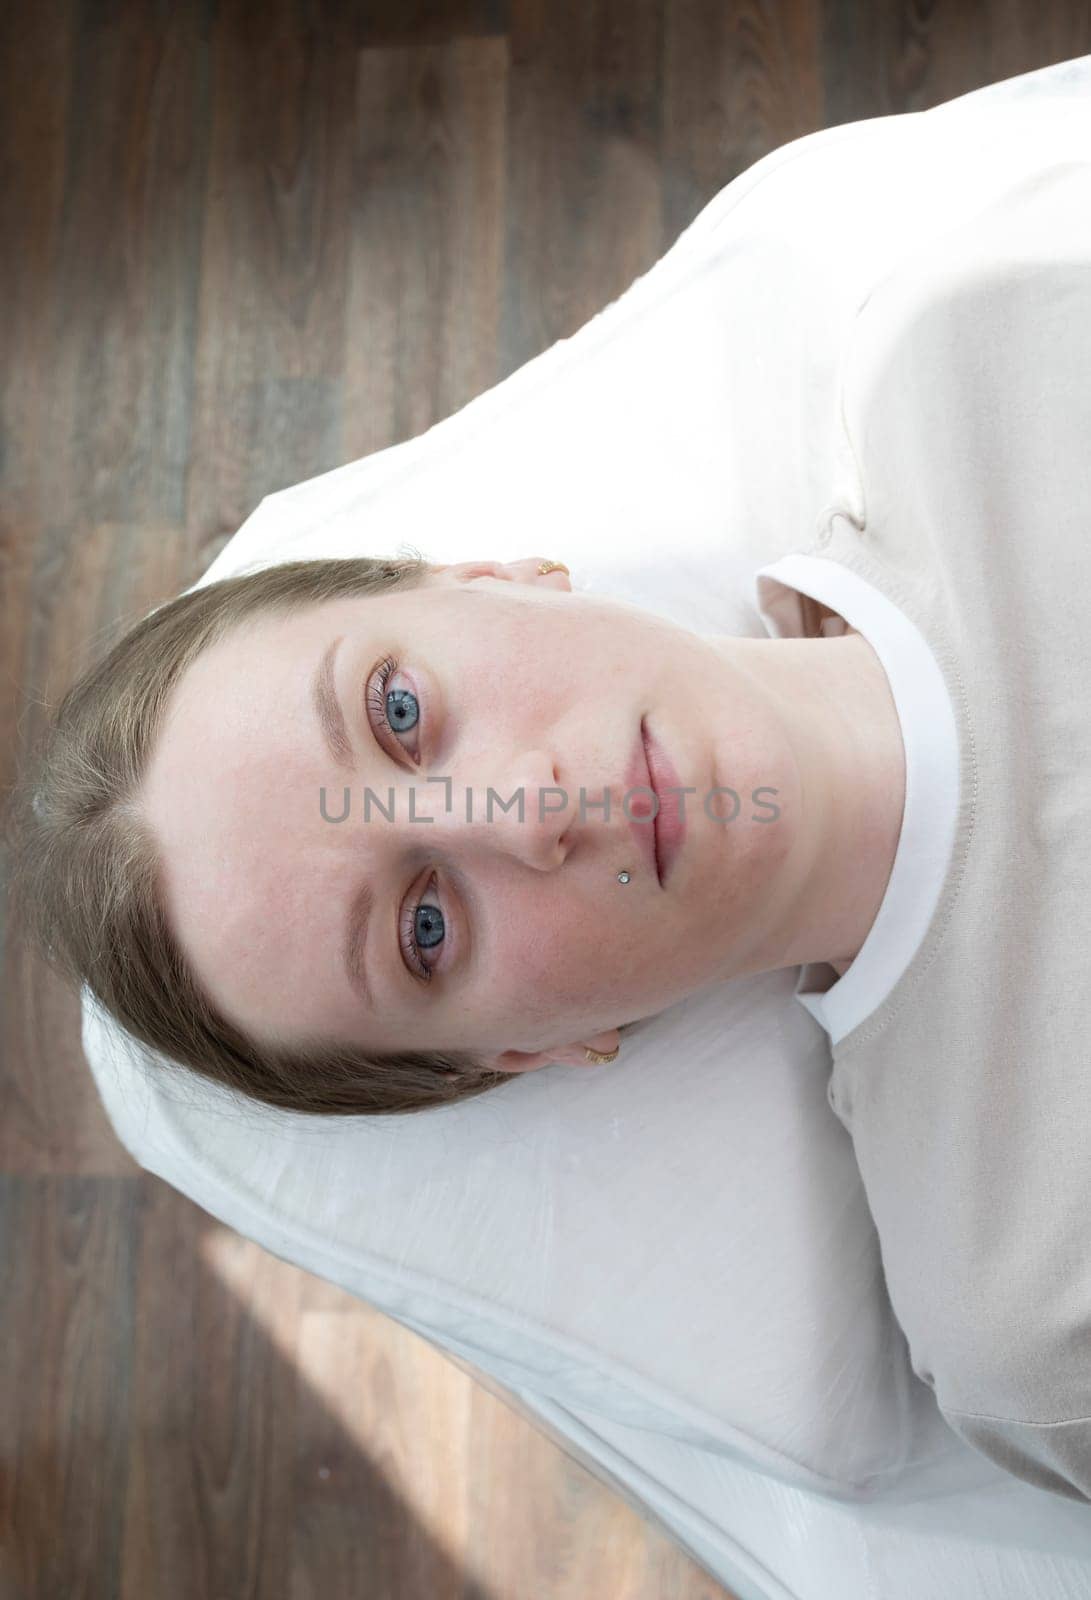 Portrait Of Caucasian Young Woman After Eyelash Lamination Procedure, Lash Treatment Lying on Couch. Top View. Vertical Plane High quality photo.